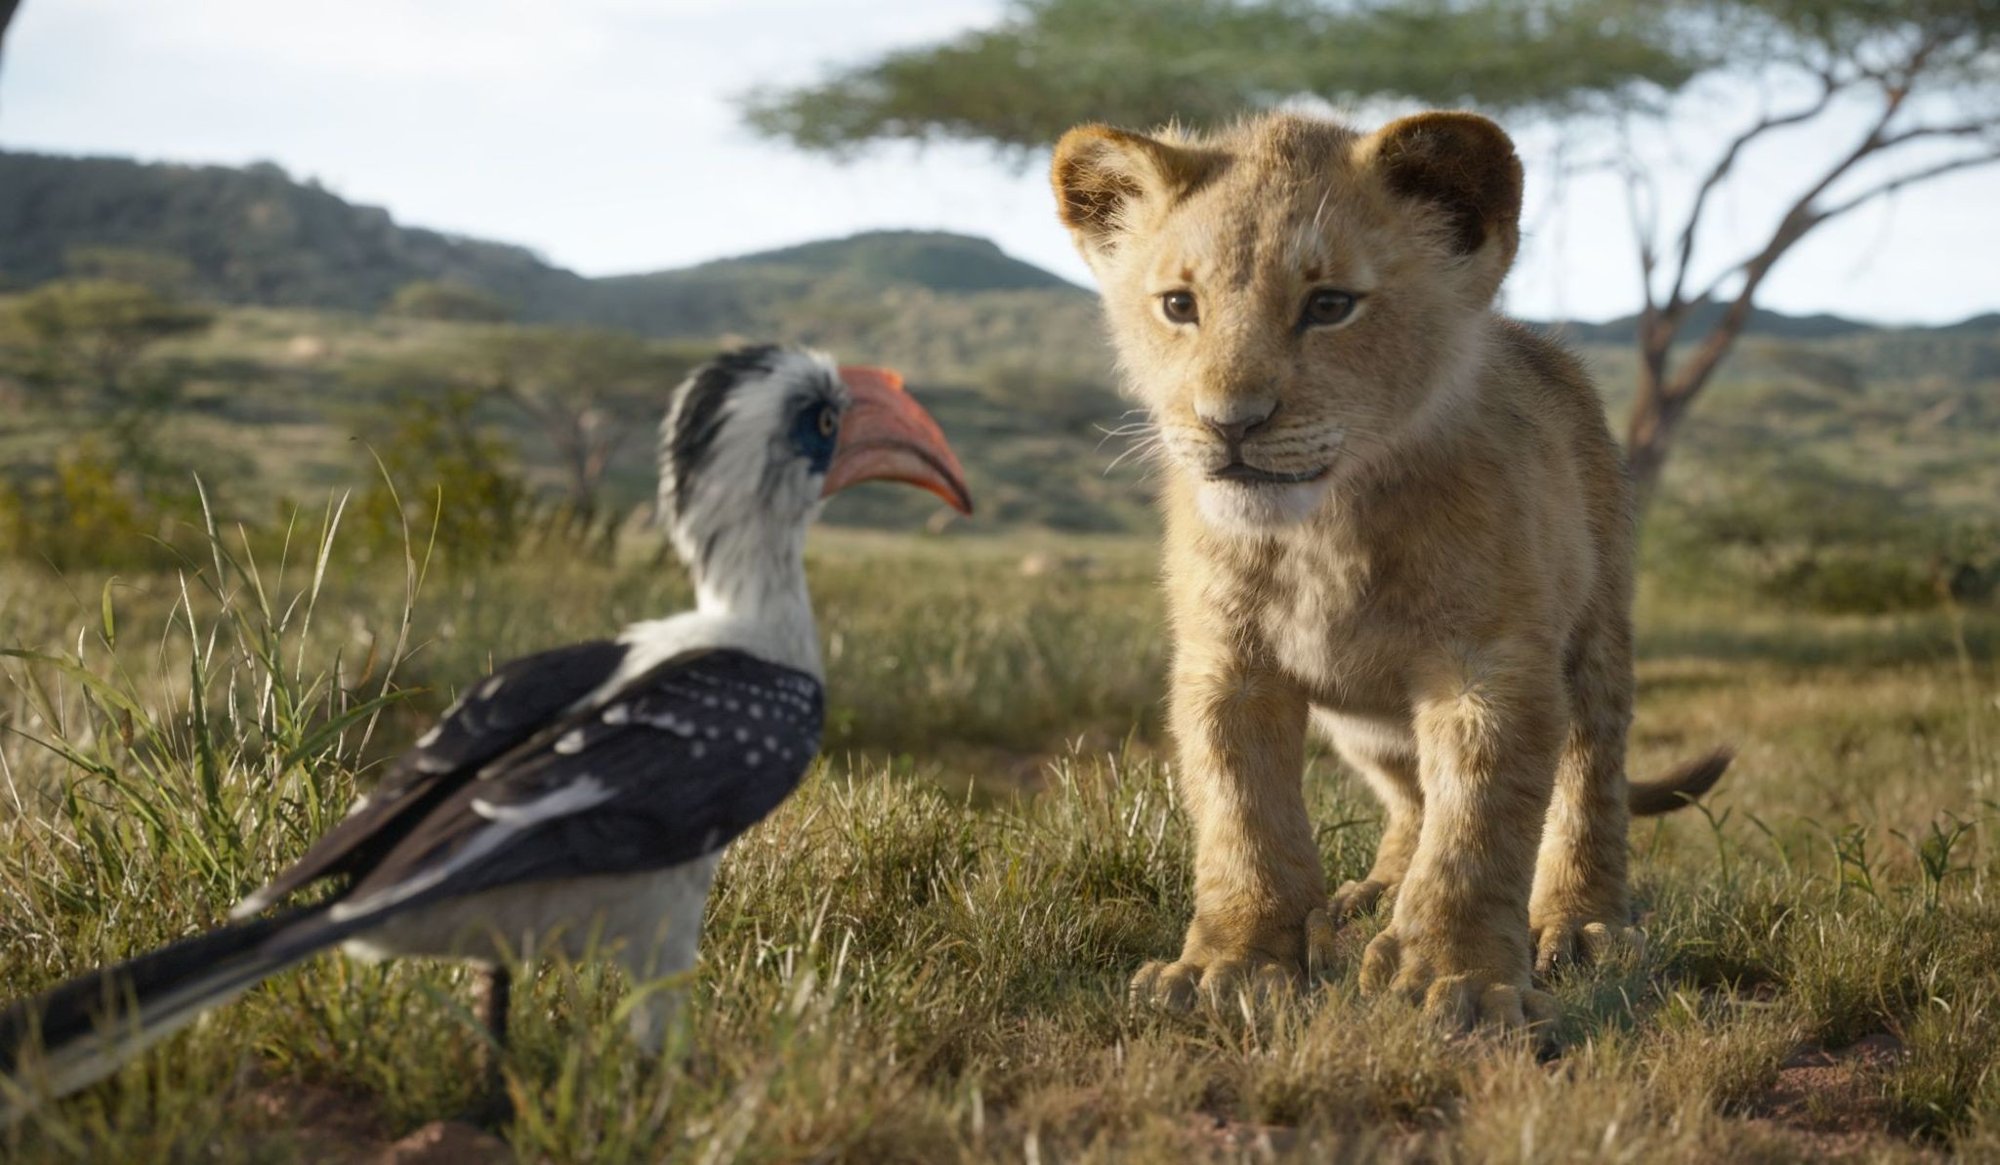 Zazu and Young Simba from Walt Disney Pictures' The Lion King (2019)